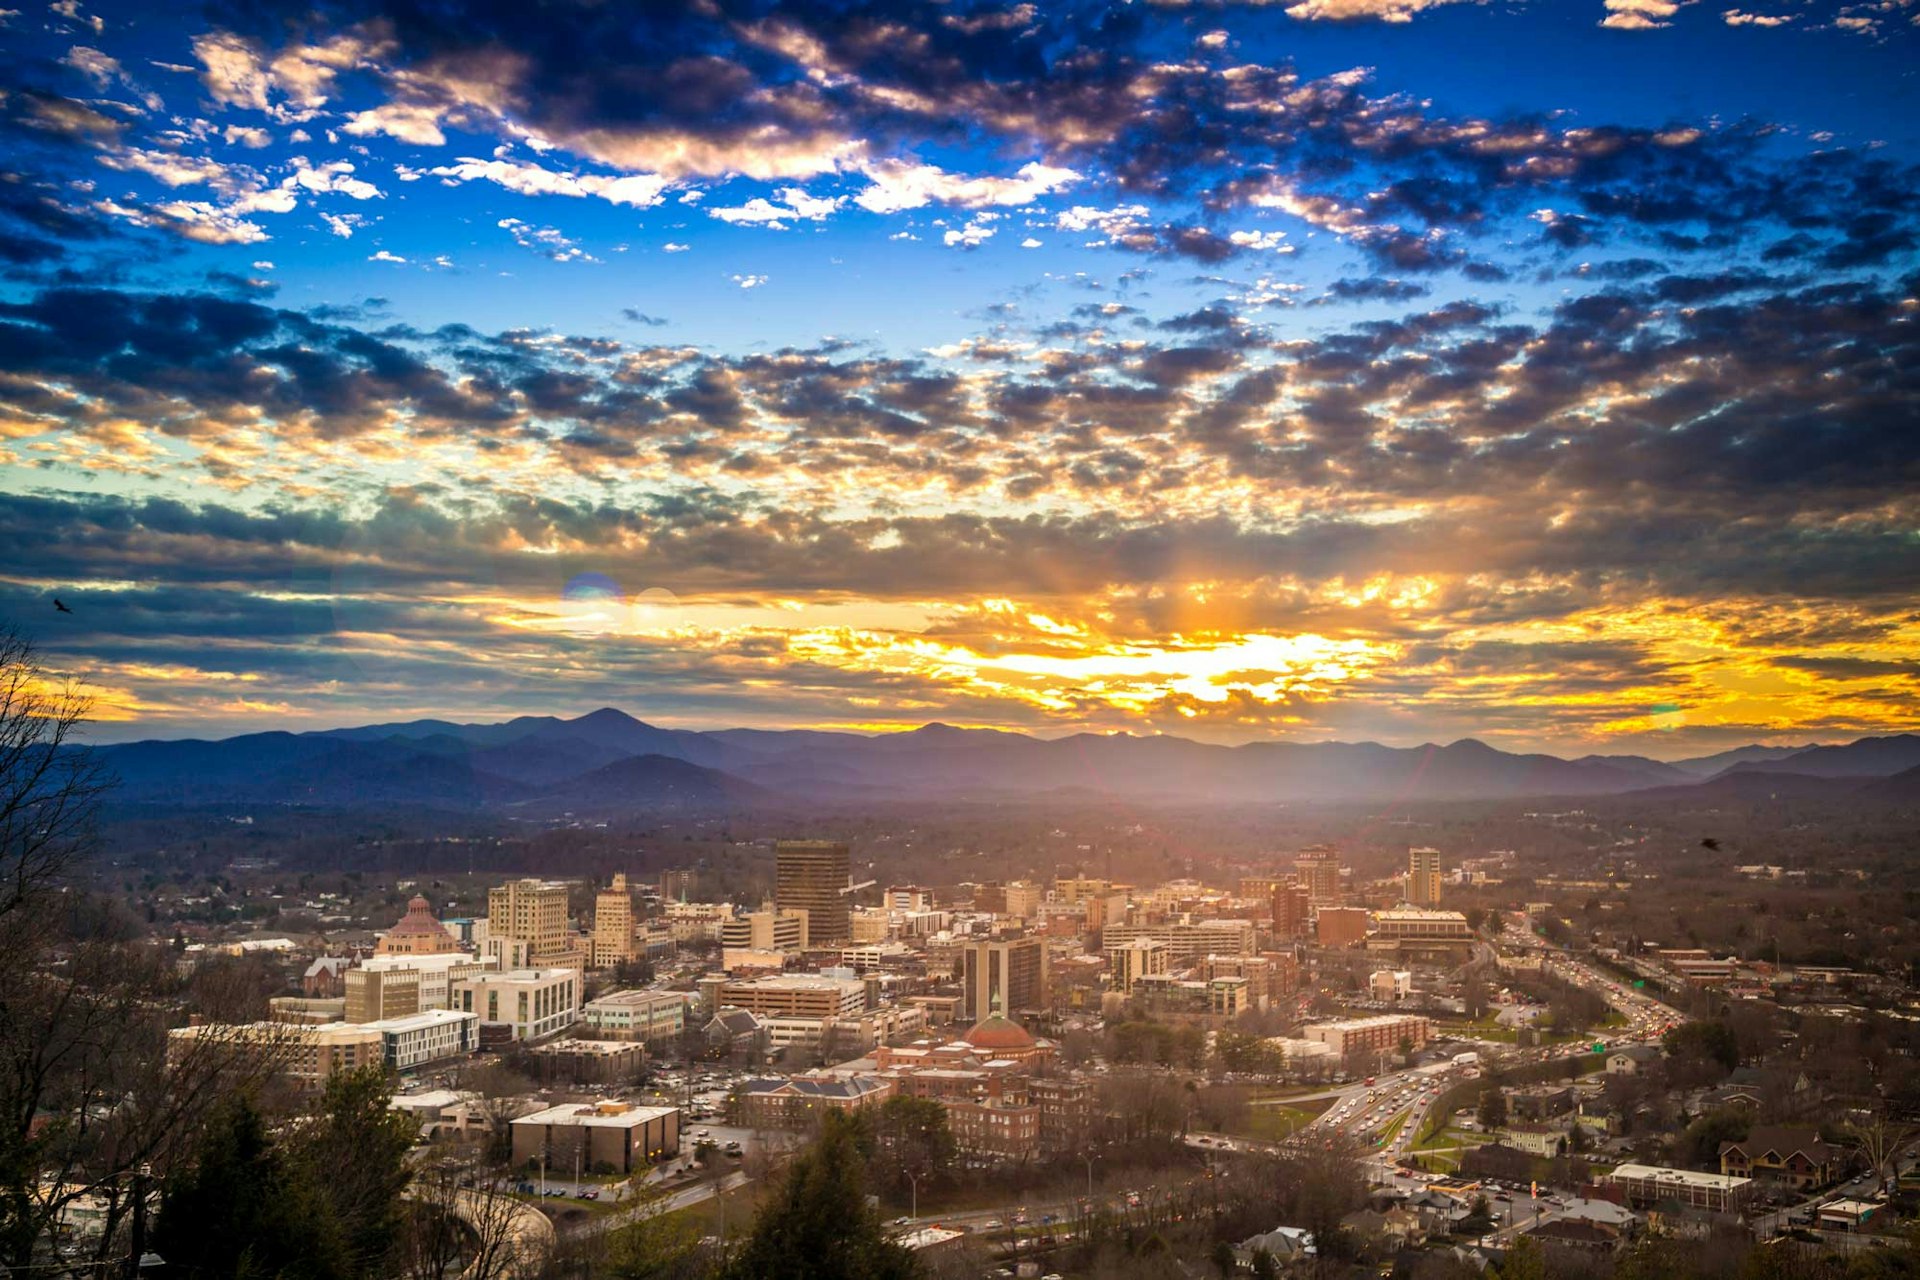 Downtown Asheville has the food and music to match the Appalachian setting © jaredkay / Getty Images